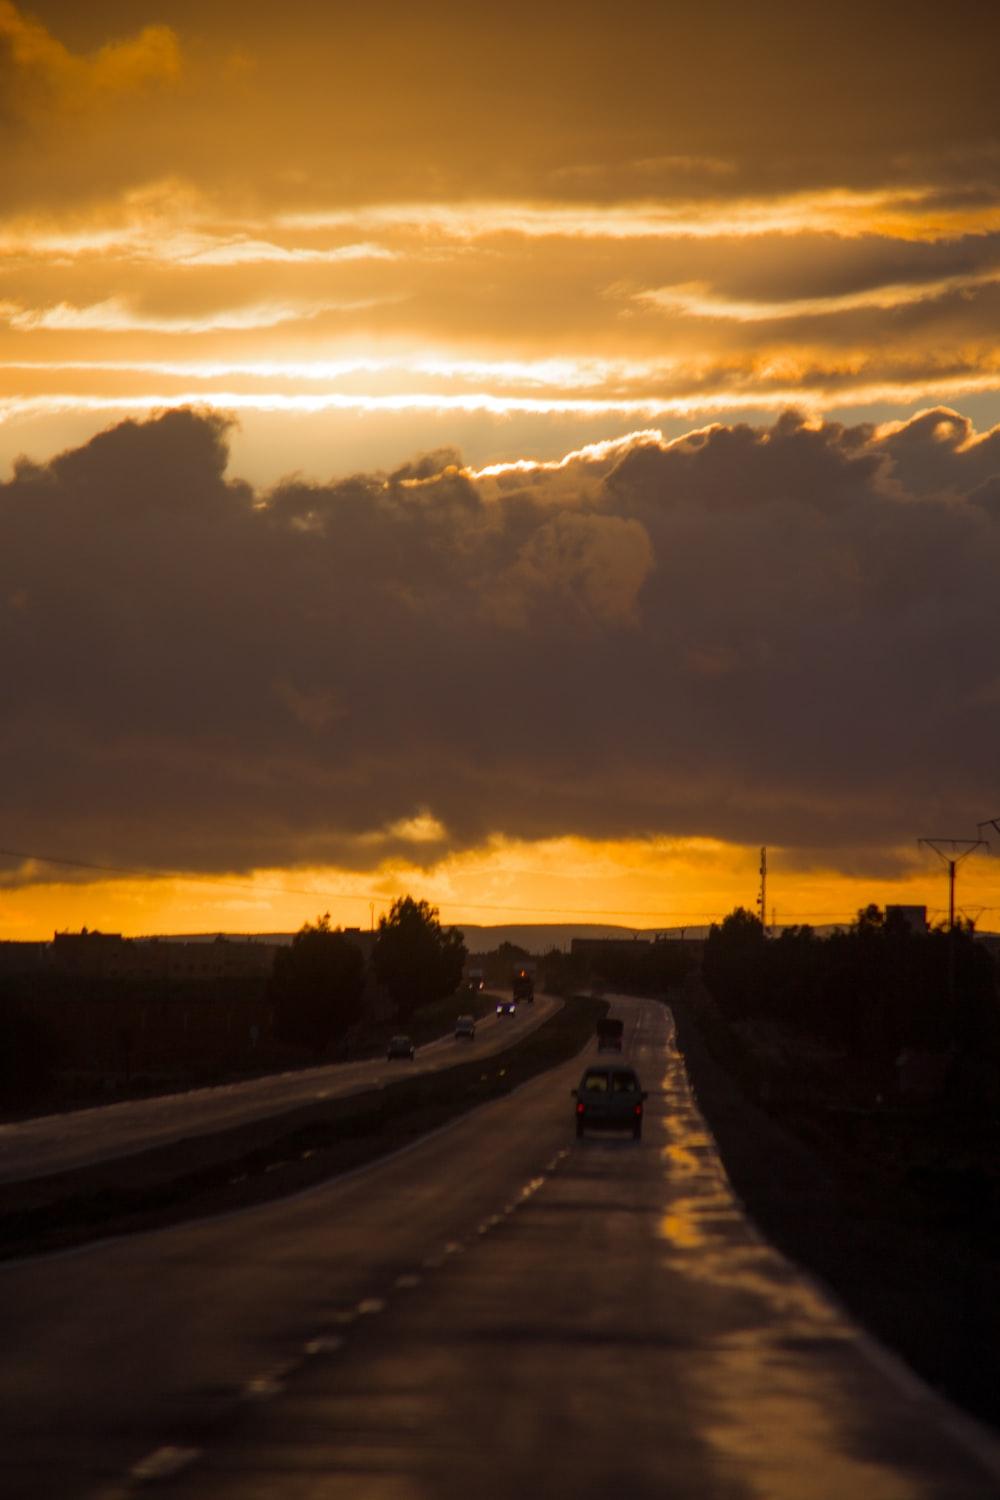 Highway Sunset Picture. Download Free Image